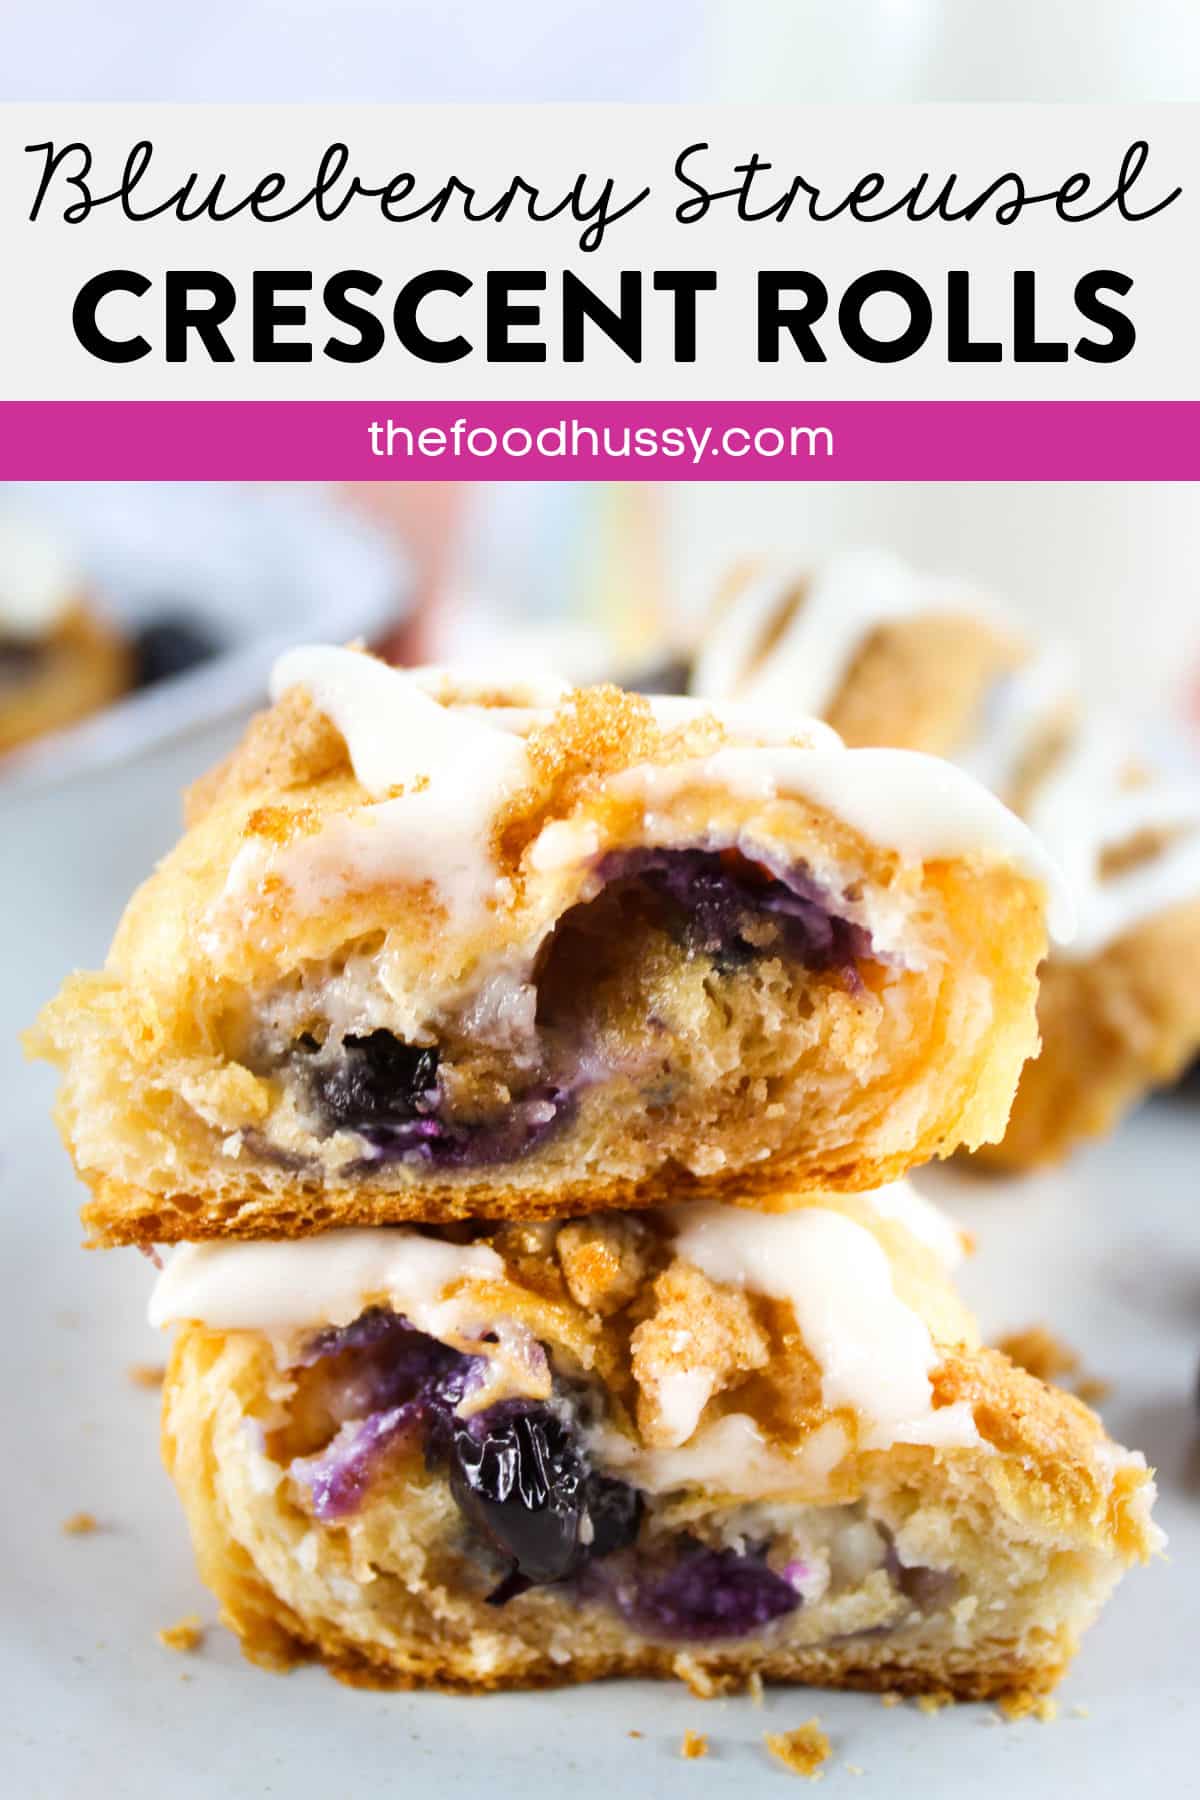 These Blueberry Cream Cheese Crescent Rolls will be your new favorite pastry! Whether it's a weeknight dessert or a Sunday brunch - they are creamy, fruity and delicious.  via @foodhussy